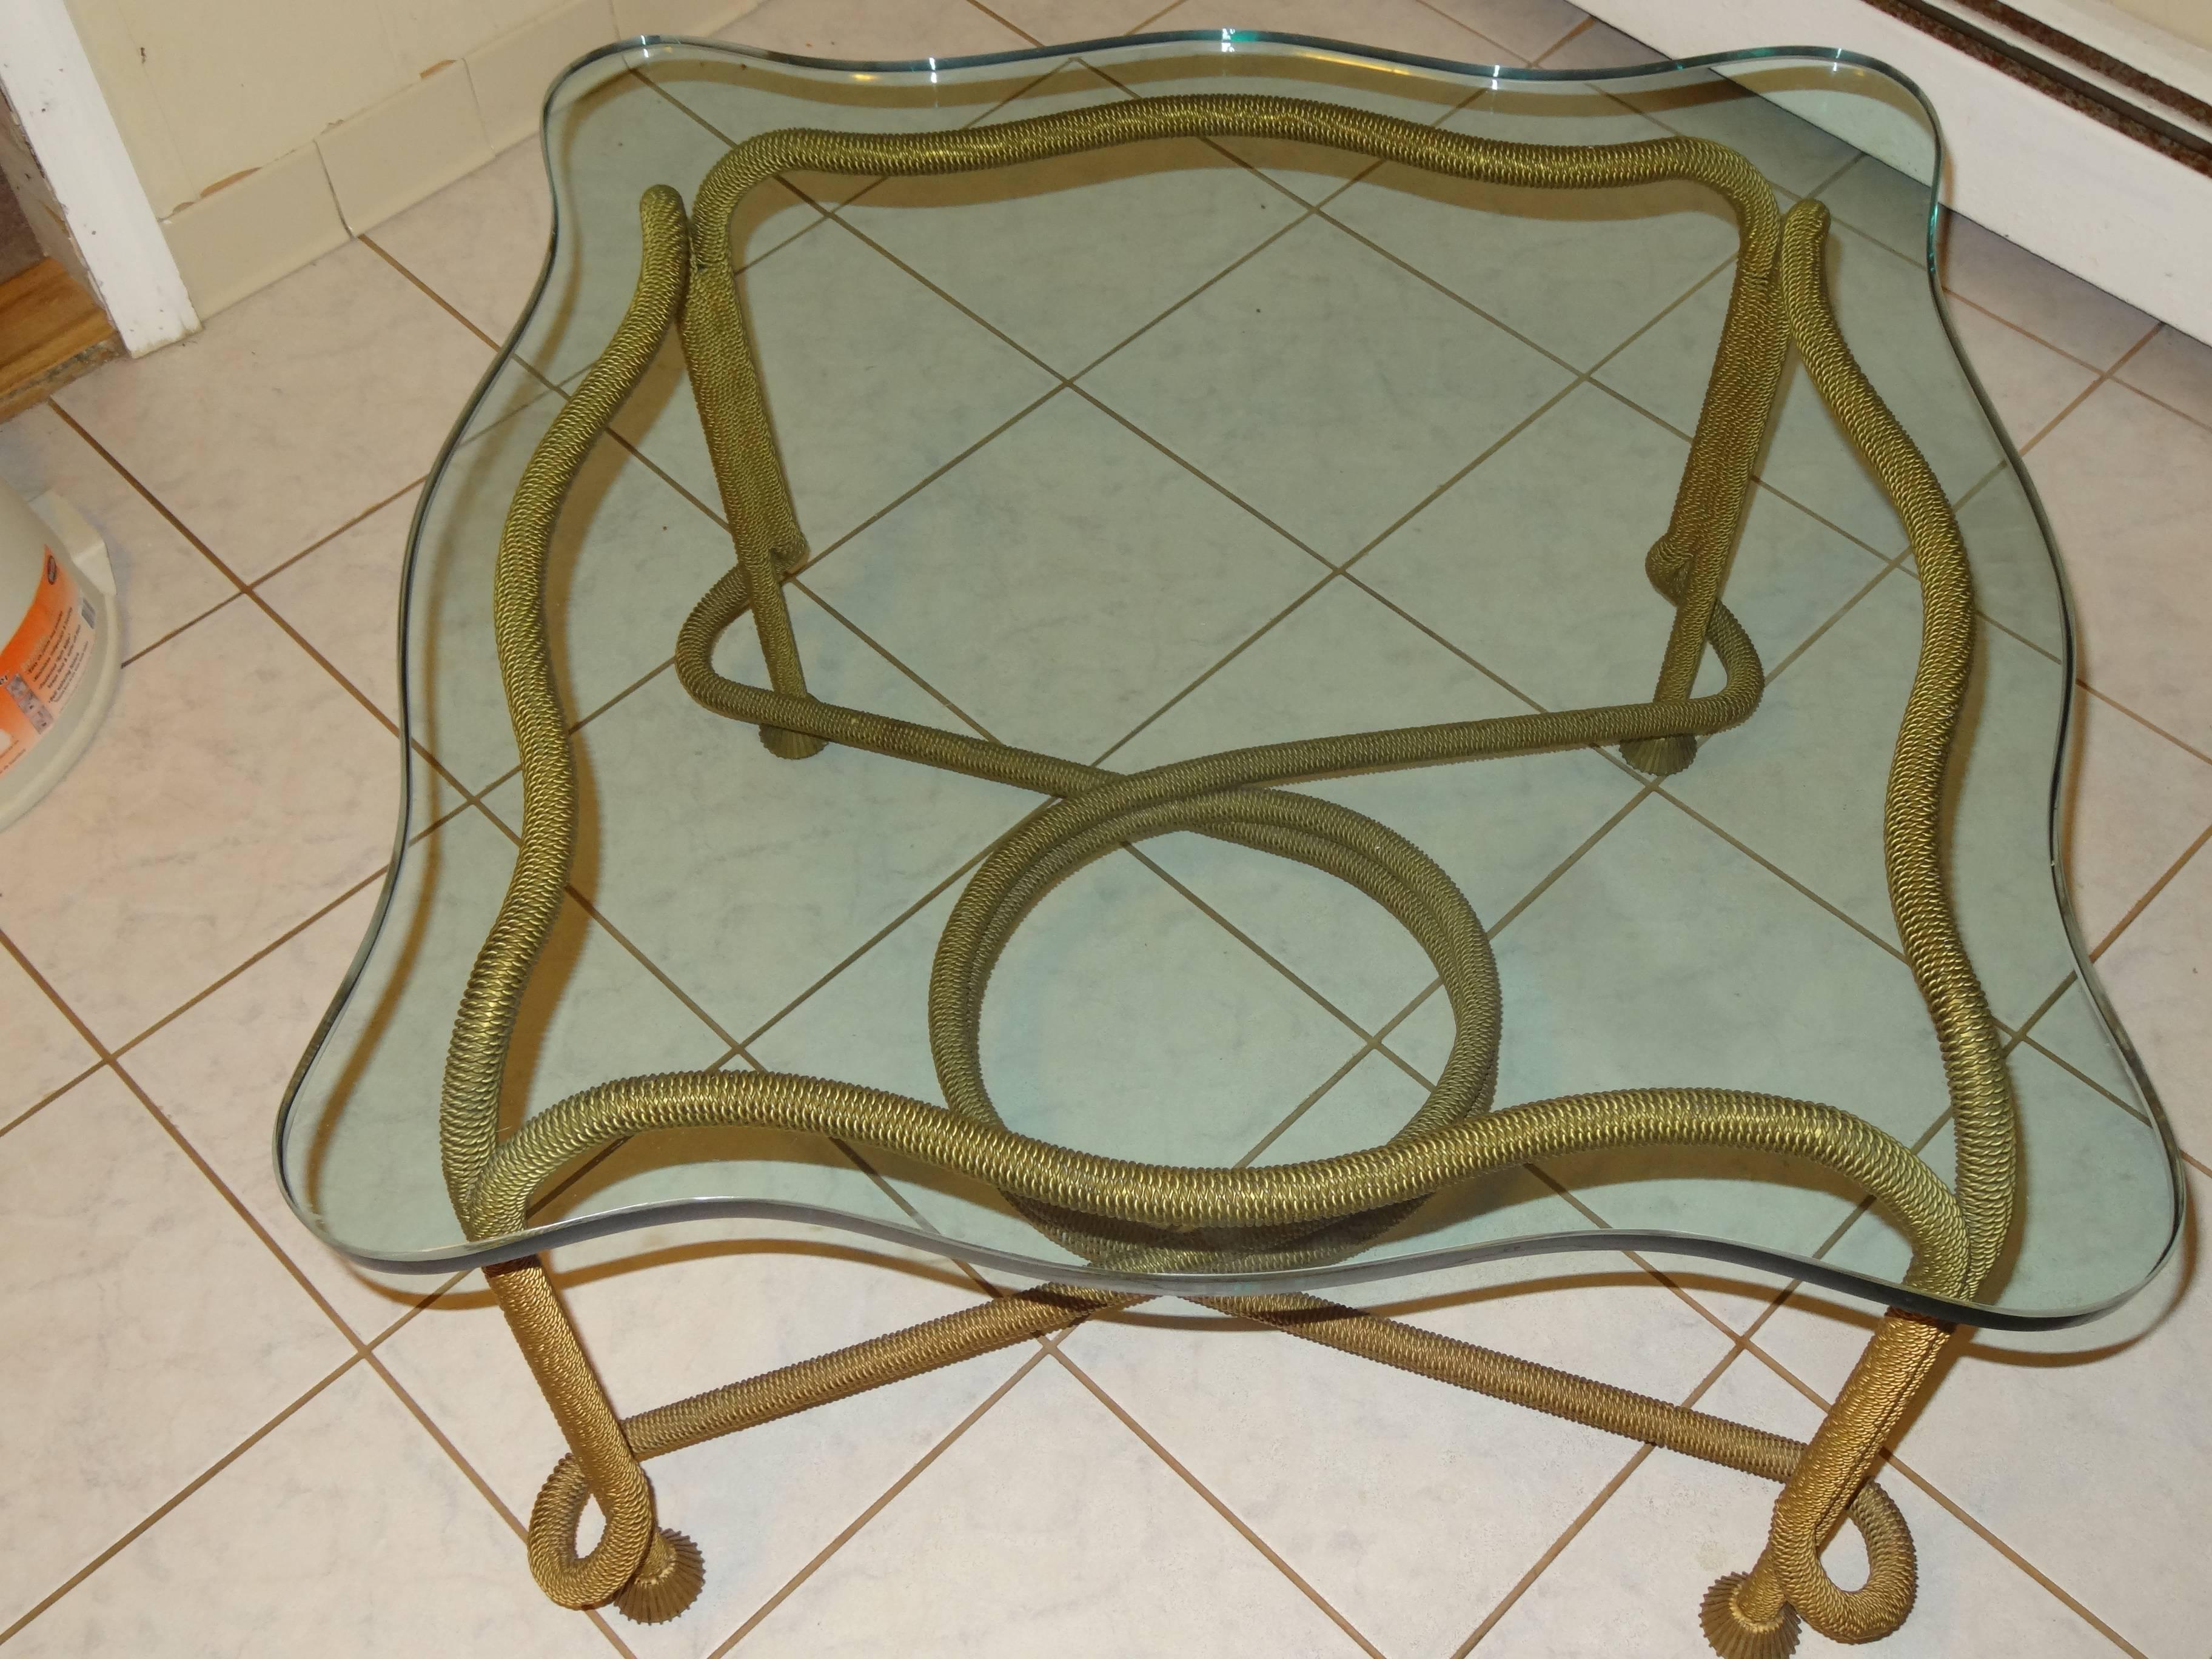 French Beaded Rope Table In Excellent Condition For Sale In North Miami, FL